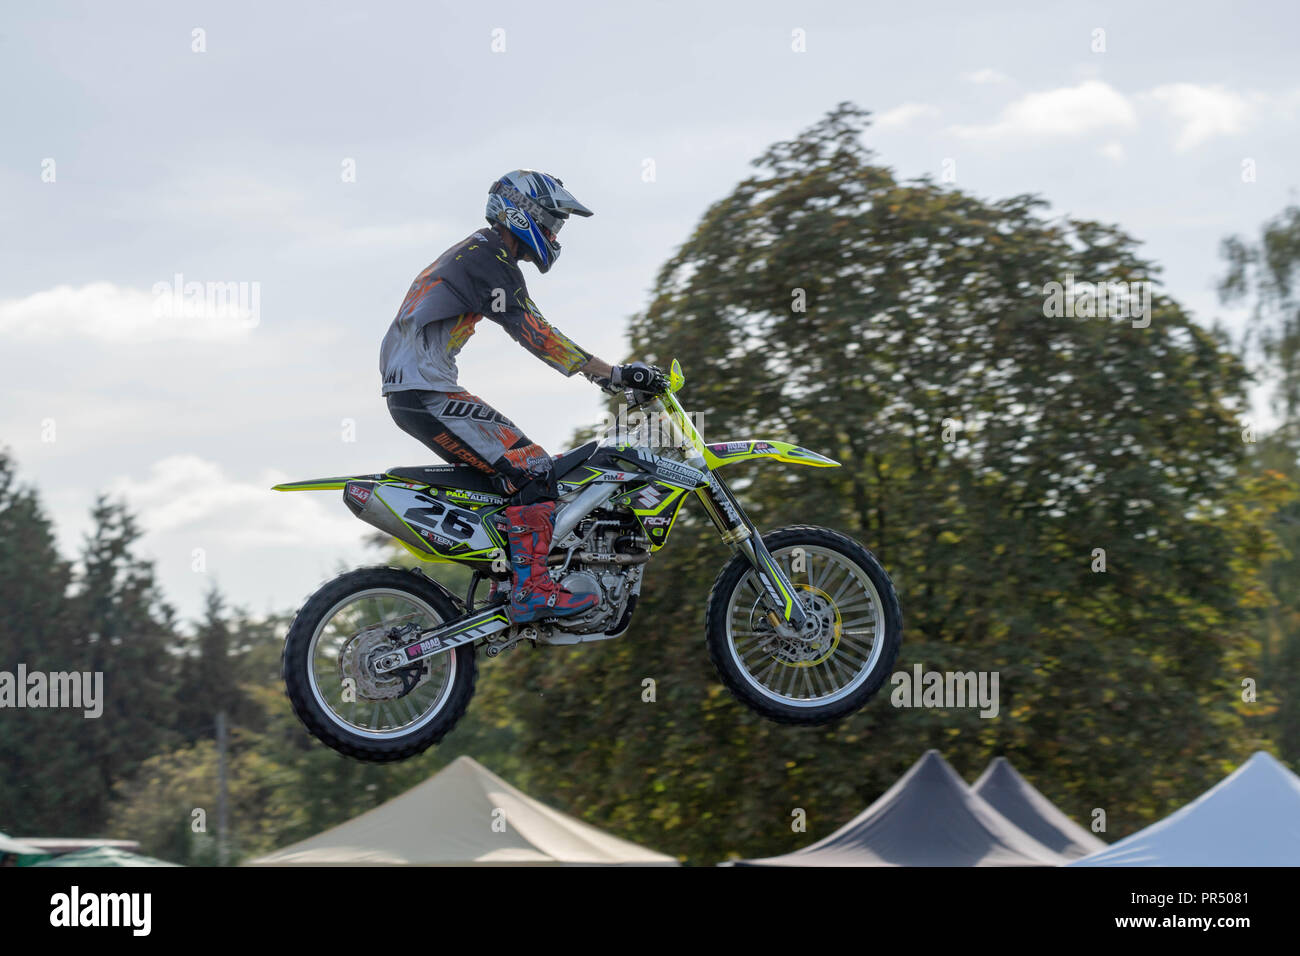 Brentwood Essex 29th September 2018 Essex Country Show in Weald Park Brentwood Essex in glorious autumn sunshine., Motorcycle stunt rider in mid air,   Credit Ian Davidson/Alamy Live News Stock Photo